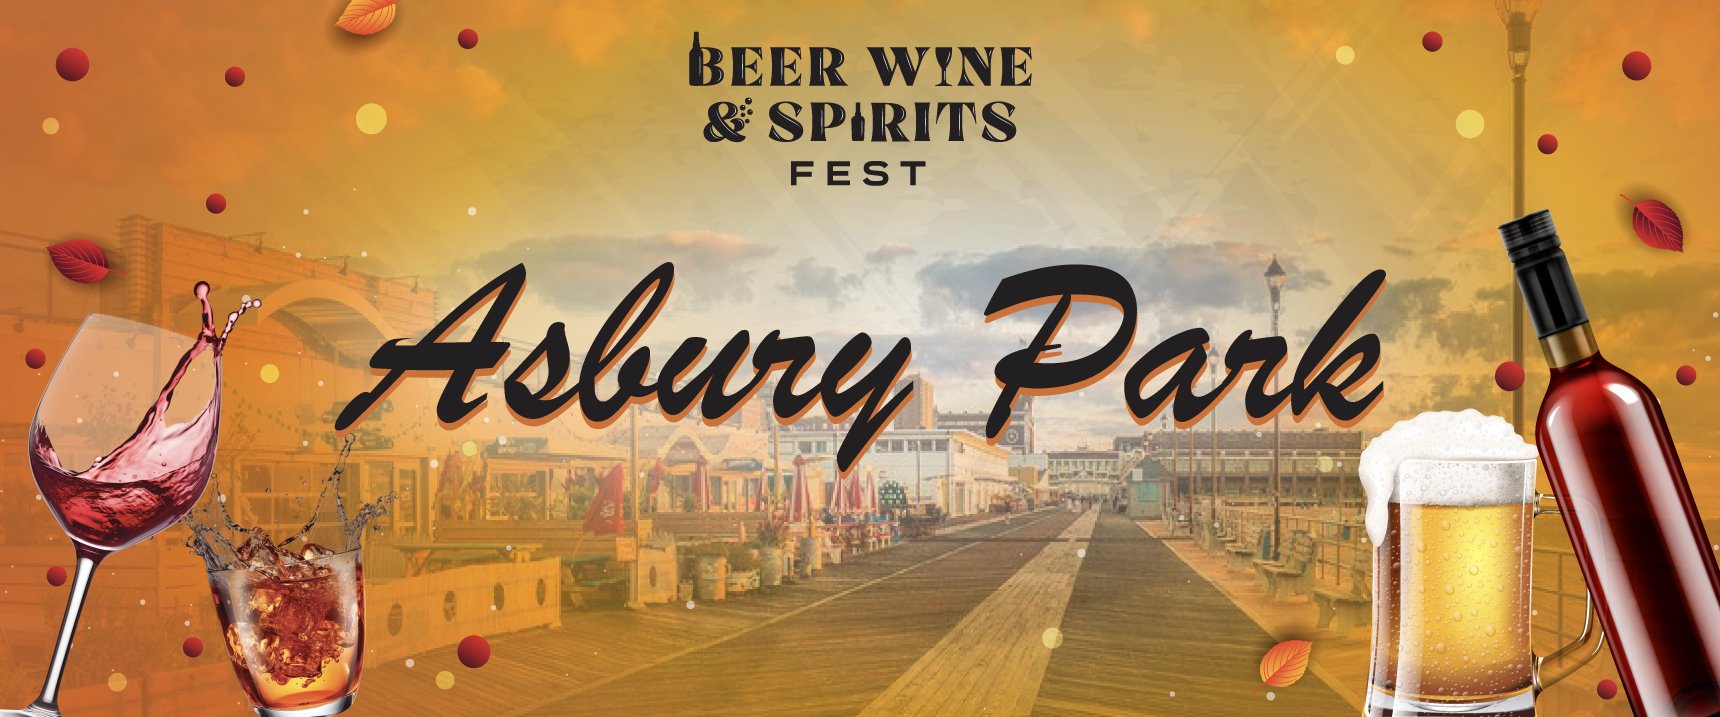 Asbury Park Beer Wine and Spirits Fest cover image